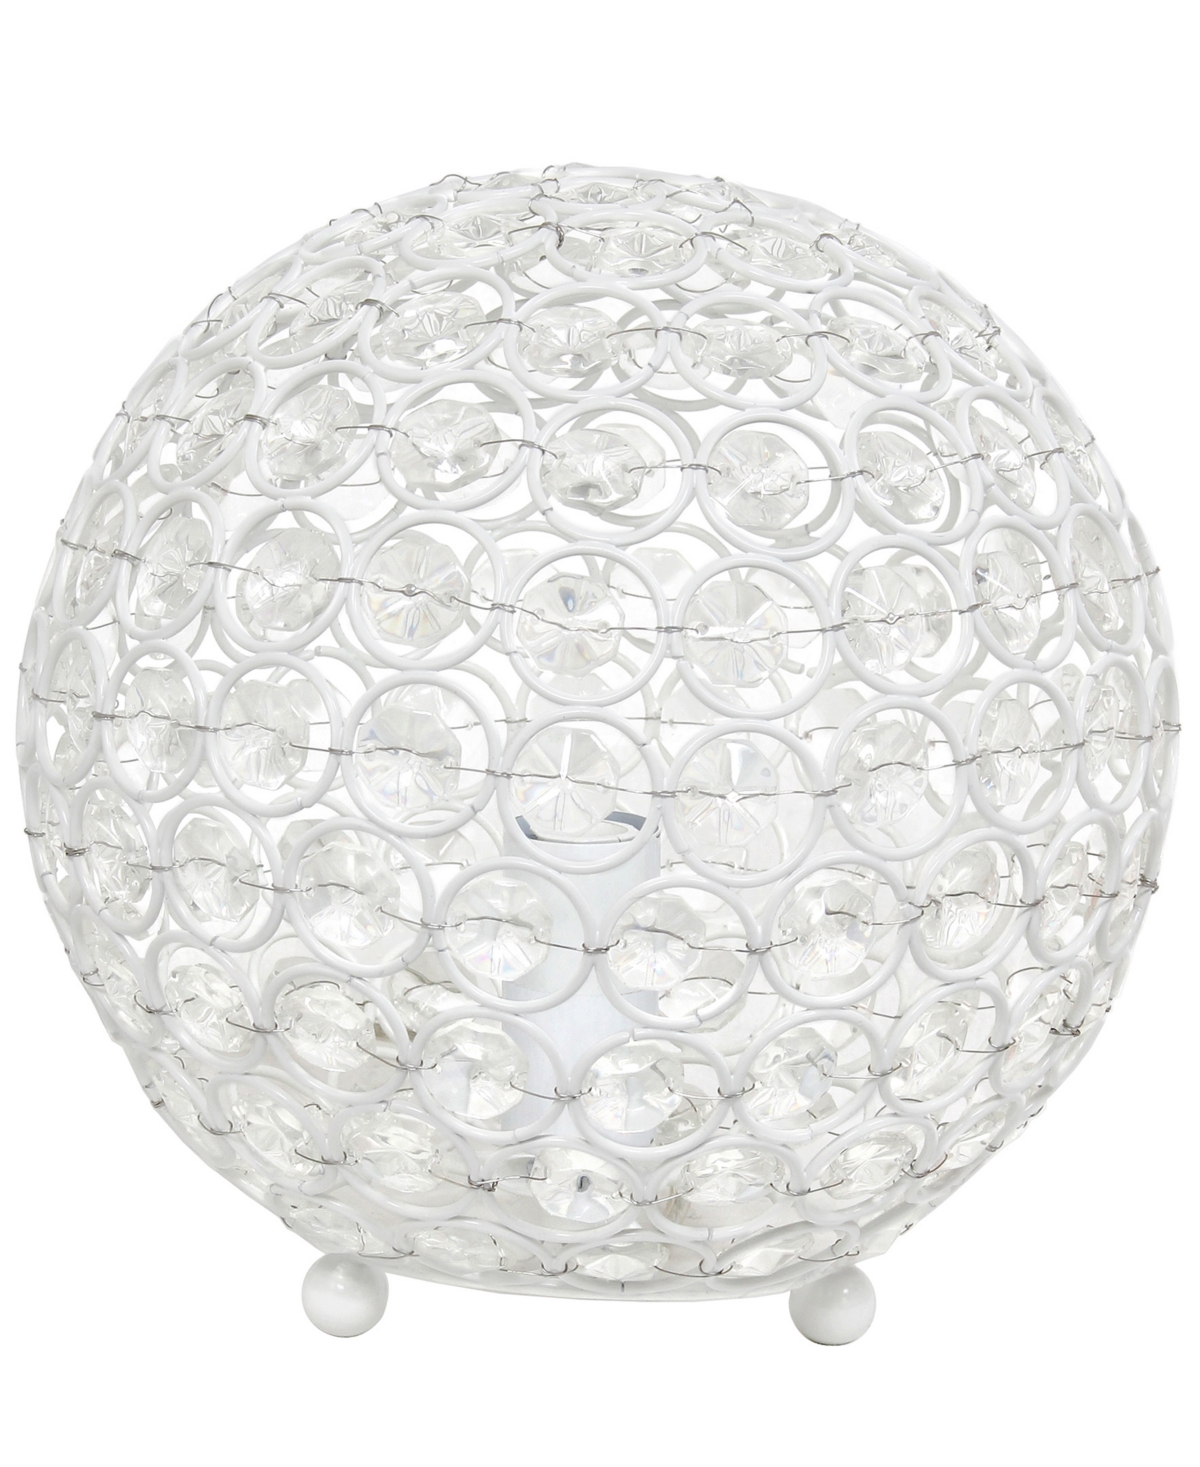 All The Rages Lalia Home Elipse 8" Metal Crystal Orb Table Lamp In White